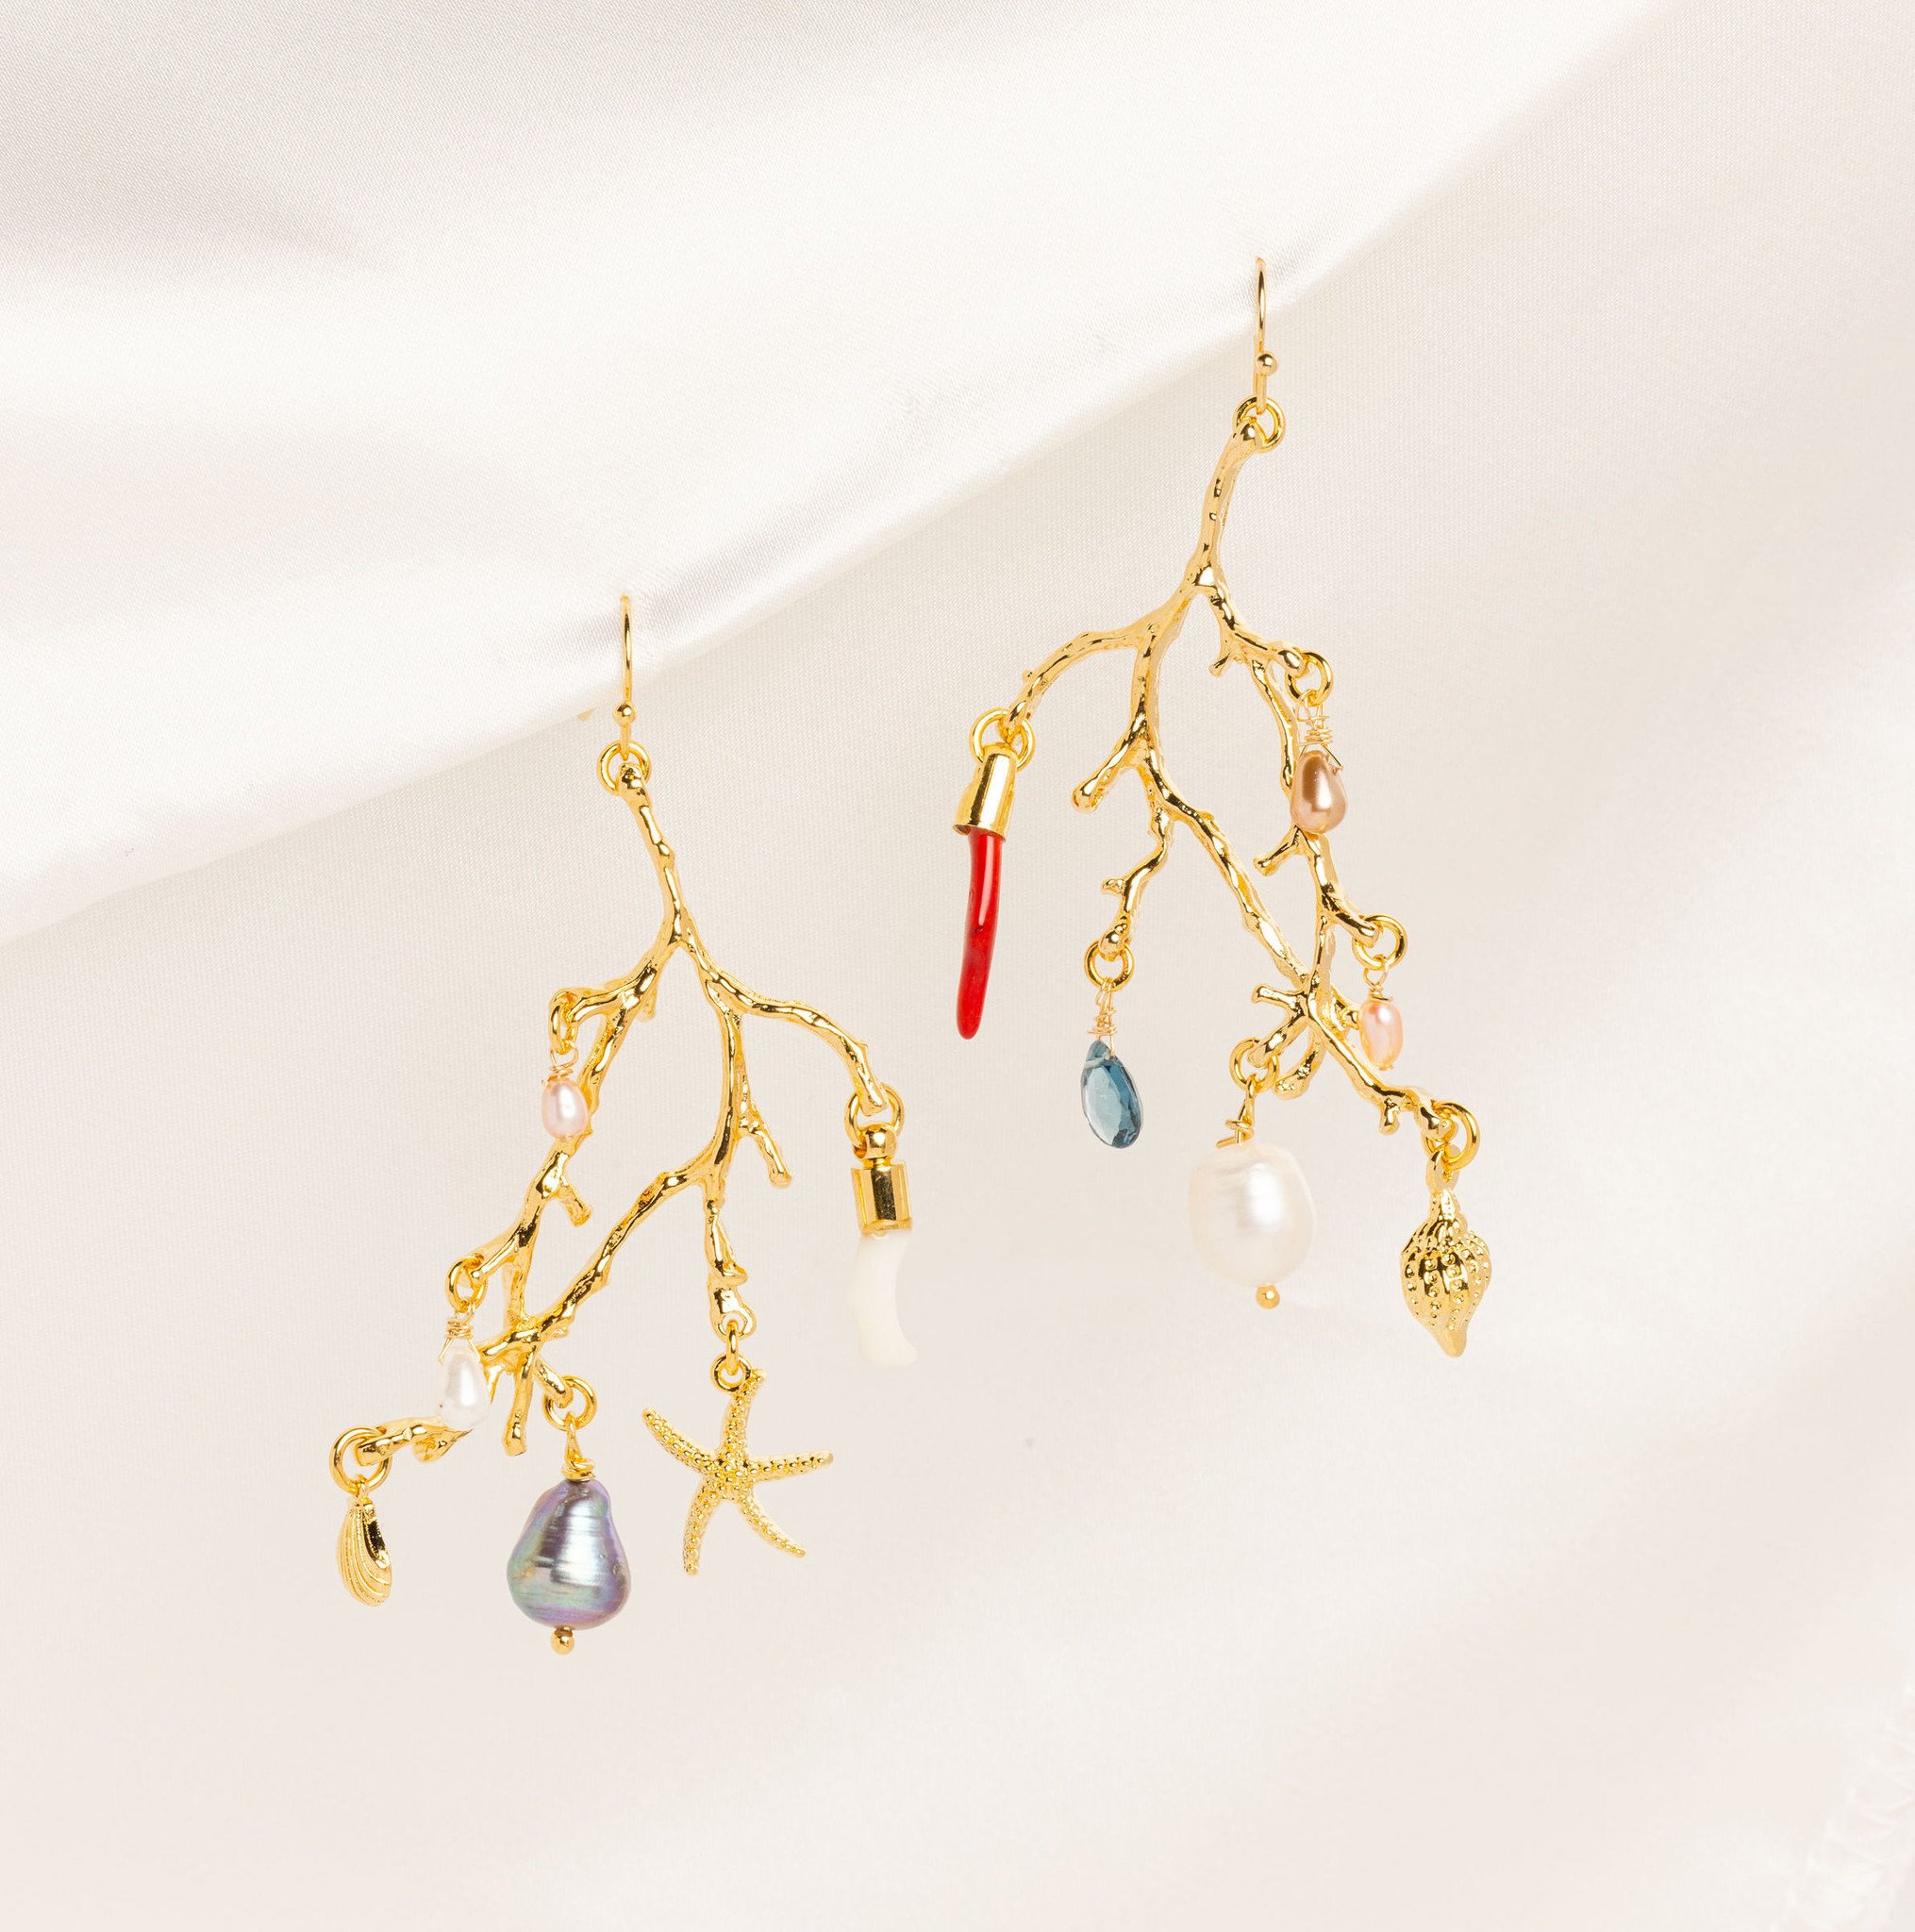 A pair of gleaming coral-branch earrings from which dangle tiny gold seashell charms, glass stones, coral-shaped charms, and freshwater pearls. They are set against a cream-colored background.